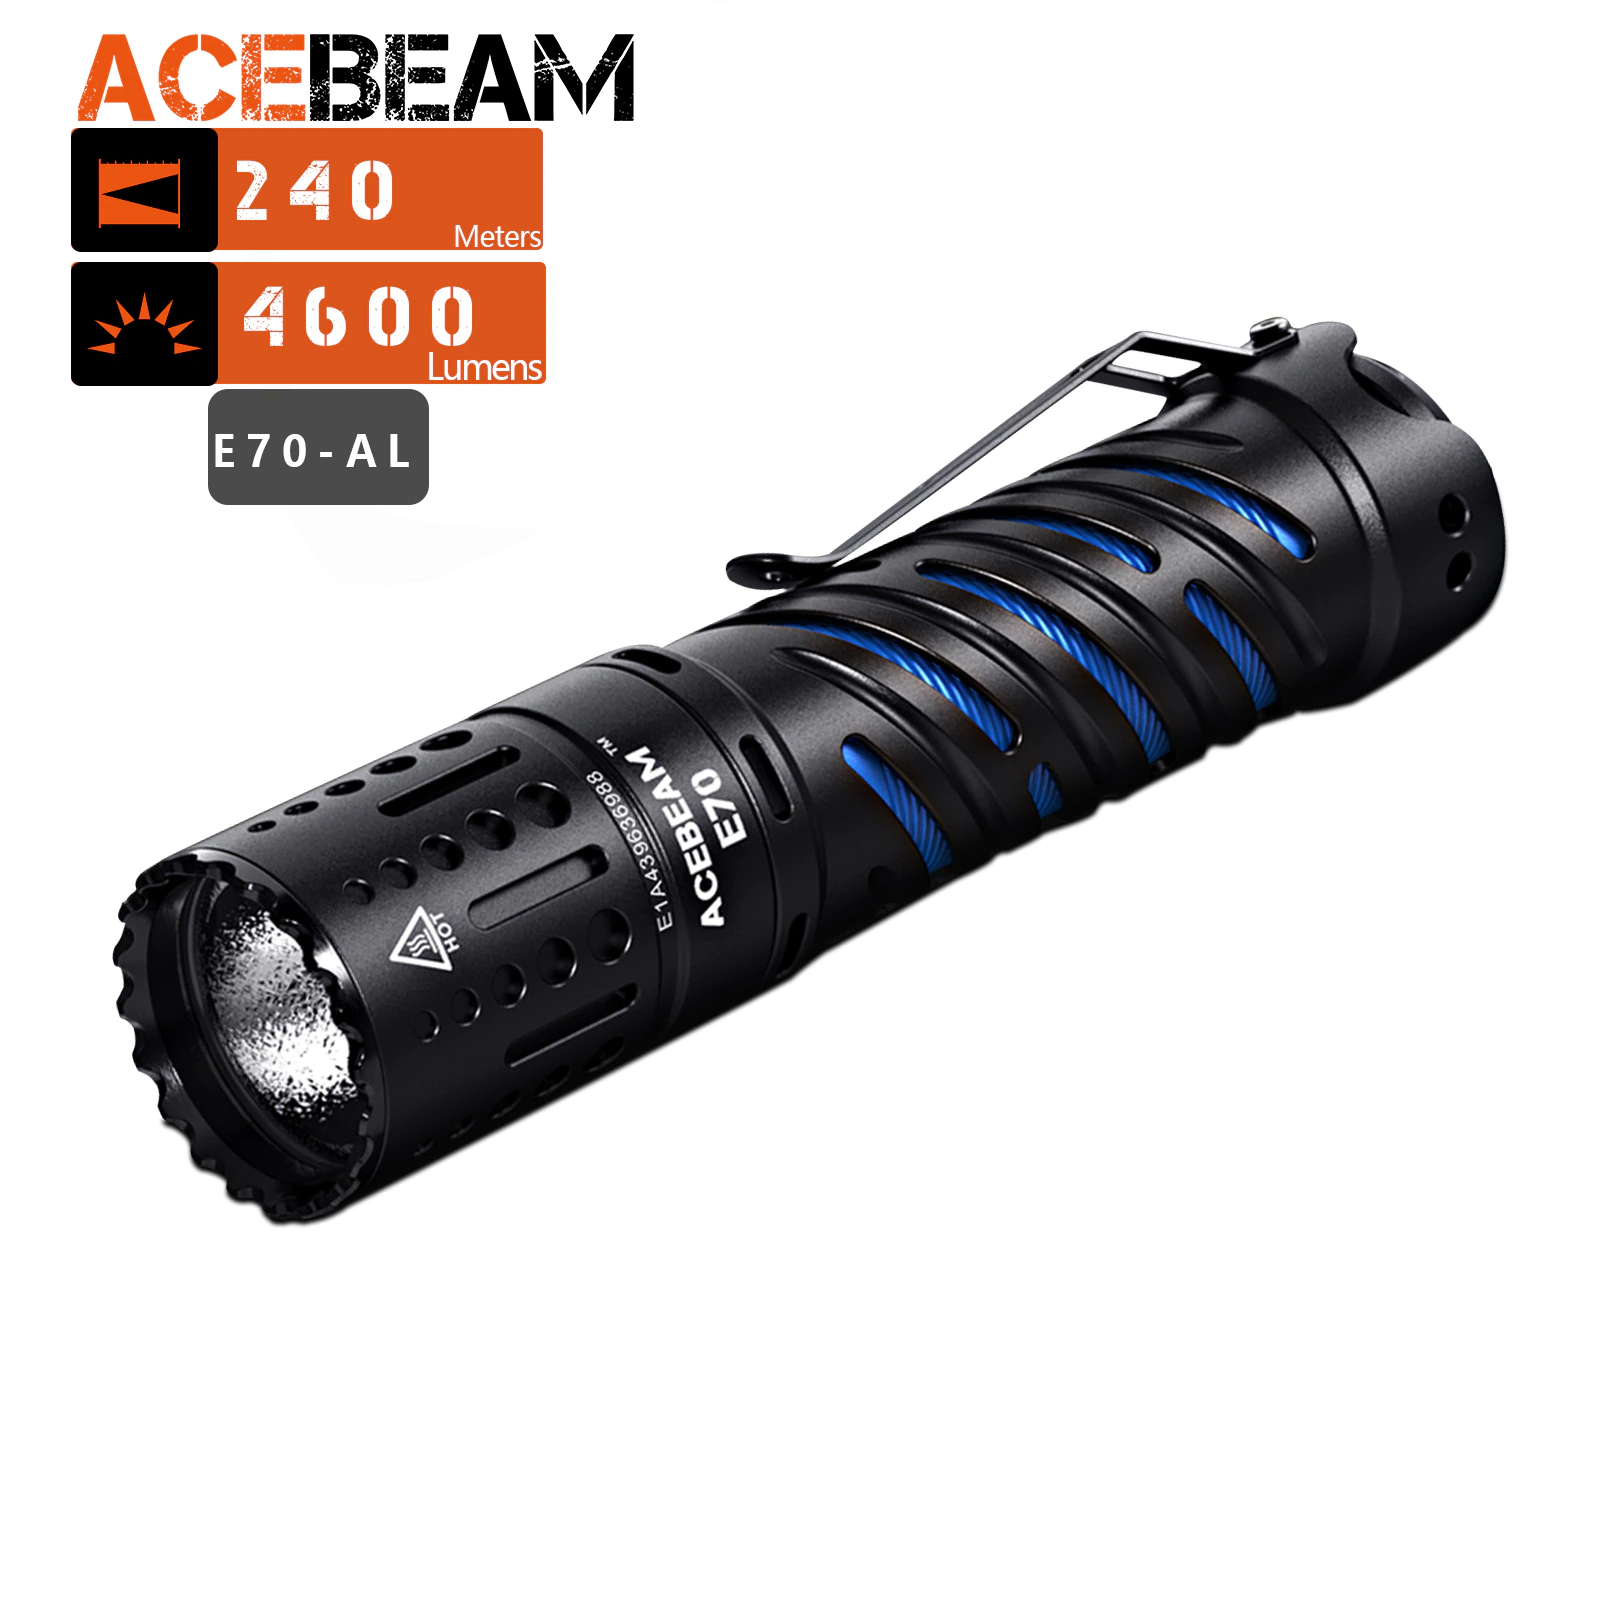 ACEBEAM E70 4600 Lumens Ultra-Compact Rechargeable EDC Flashlight, for Household Search, Outdoor Camping, Hiking